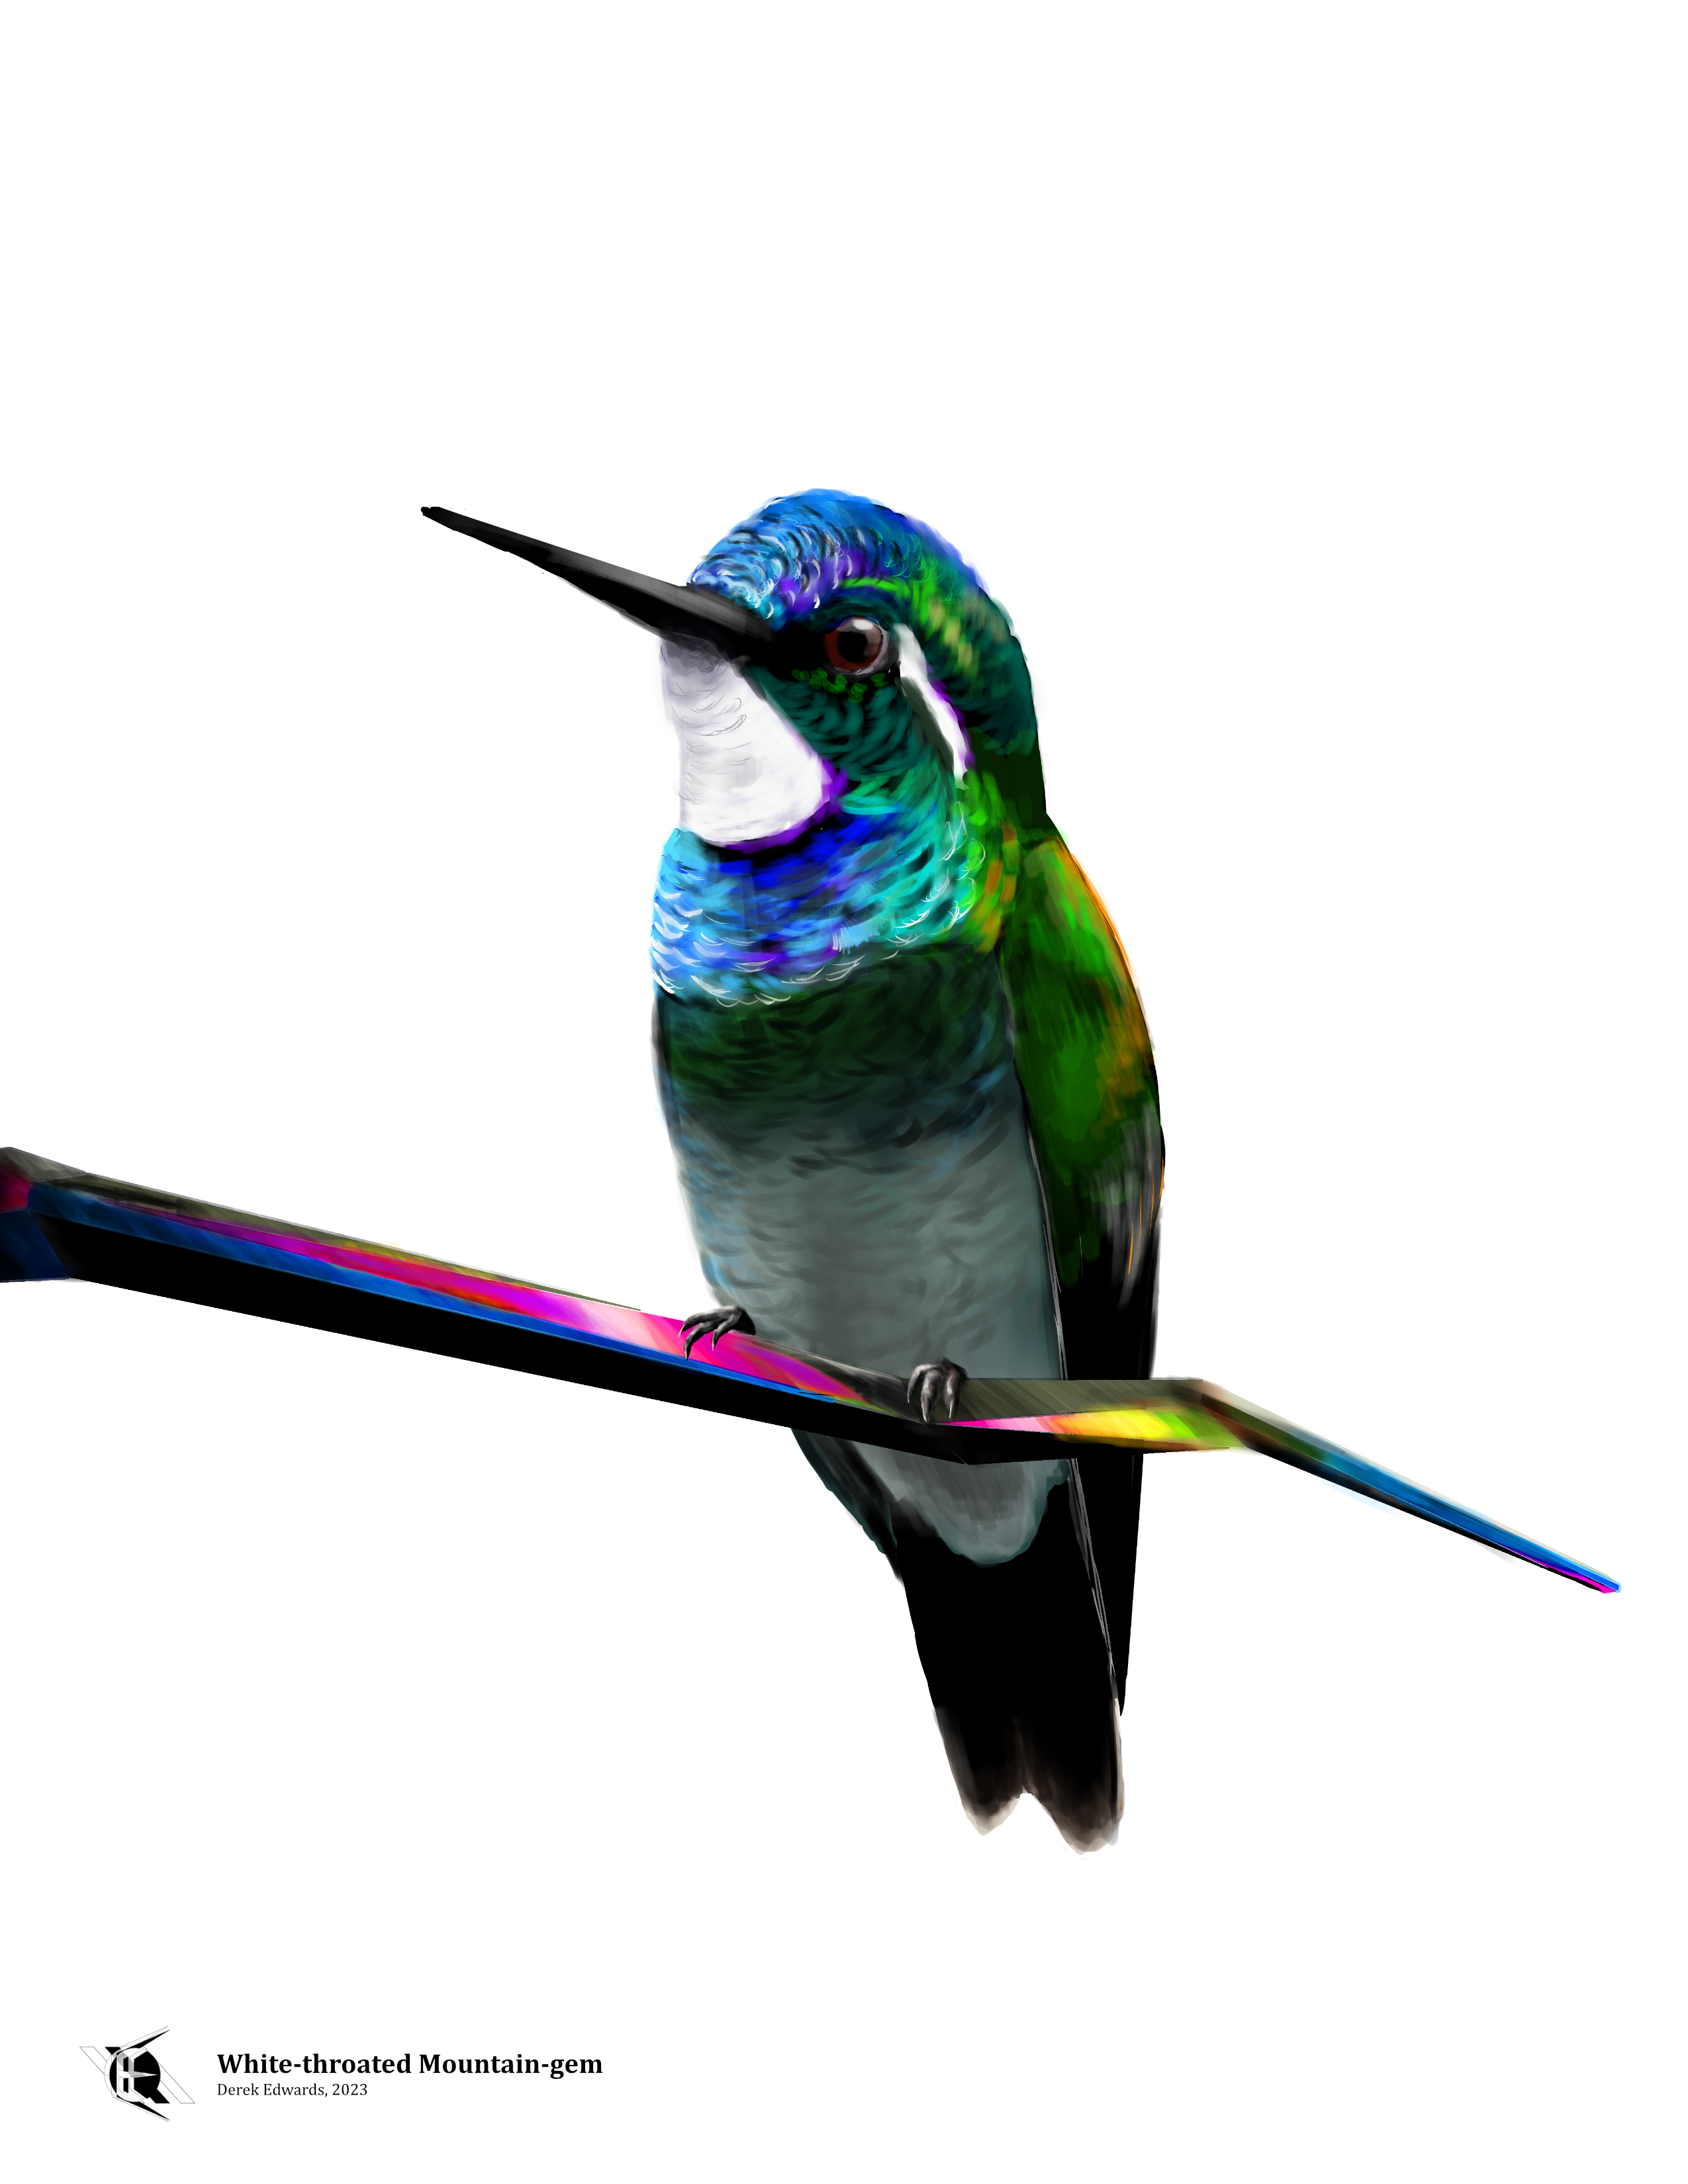 Drawing of a White-throated Mountain-gem, a dark green hummingbird with blue feathers on its head and chest and a white patch below its bill.